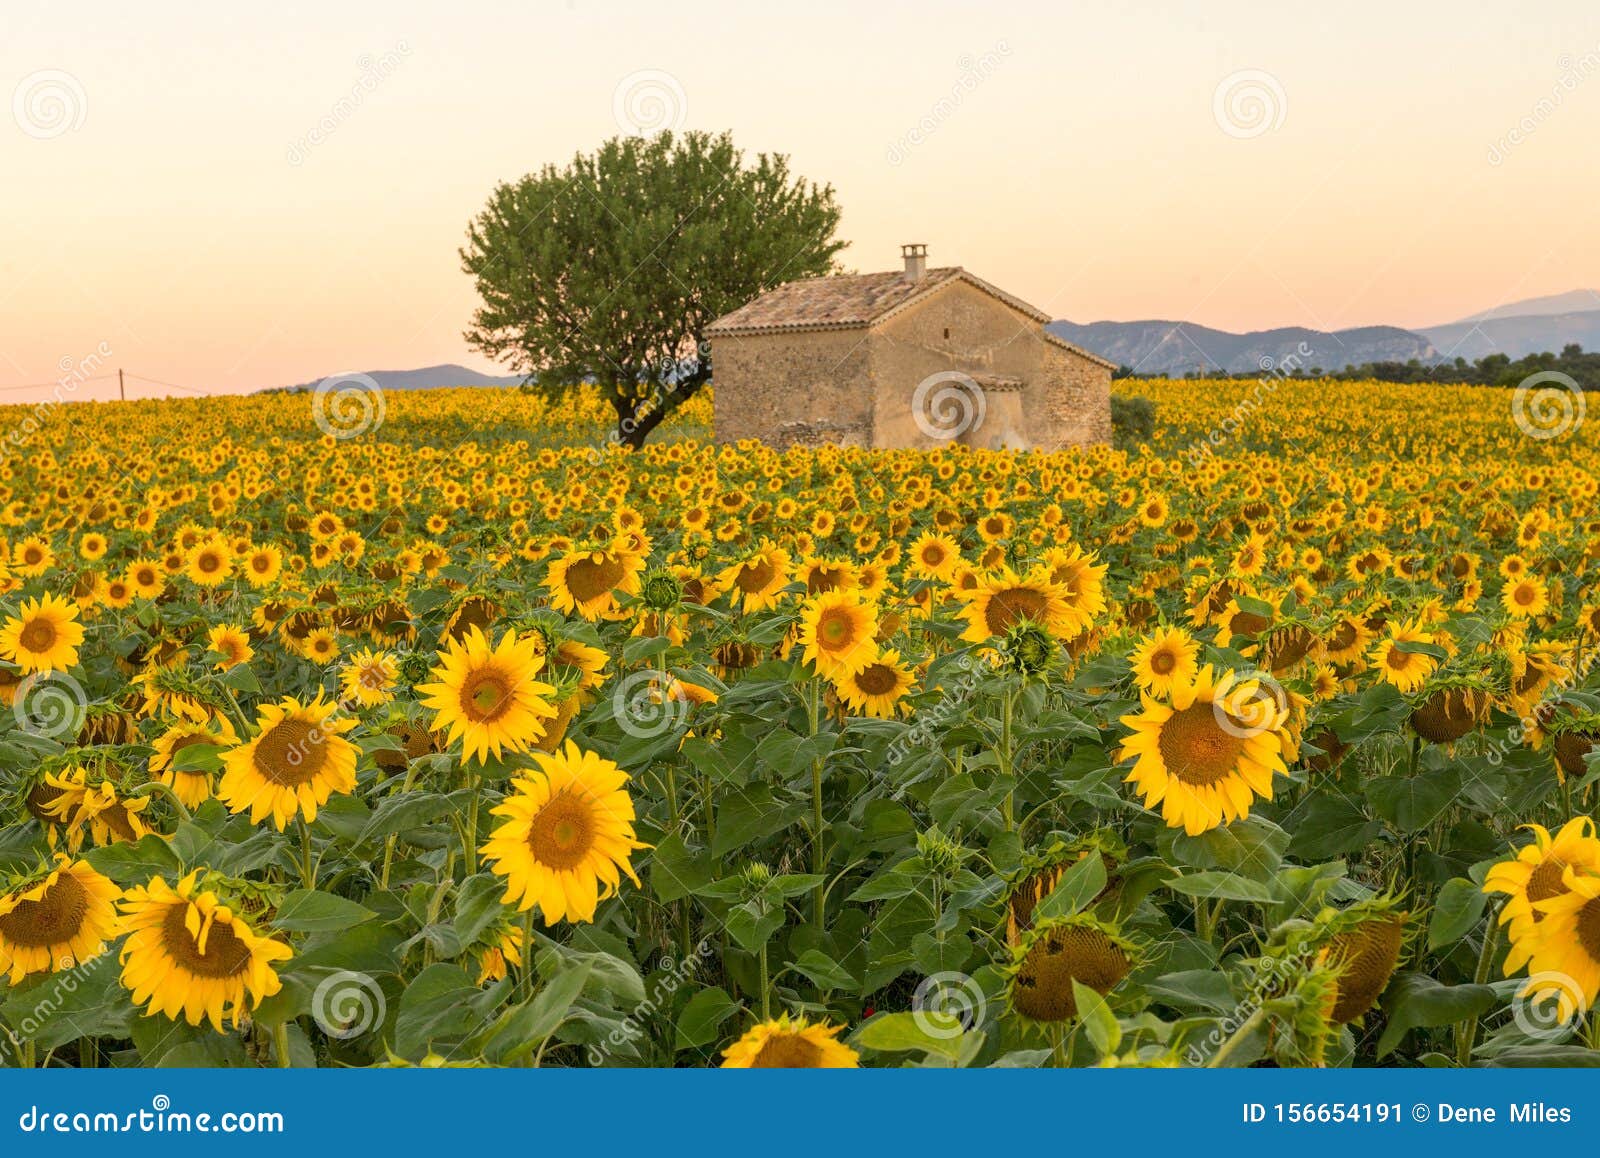 a field of sunflowers surround an old building in provence, france